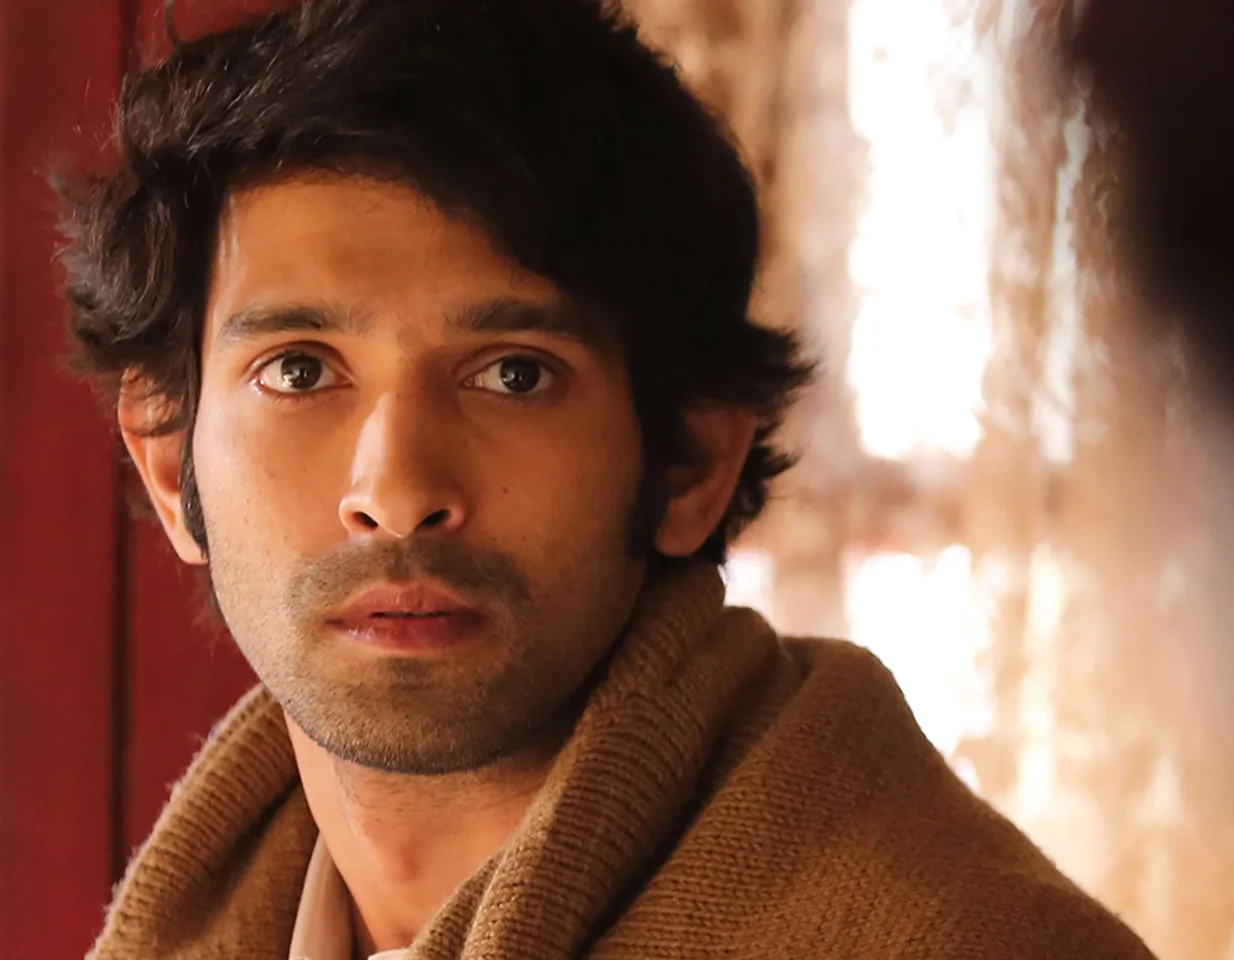 VIKRANT MASSEY—THE NEW INDIE FILM HERO TO WATCH OUT FOR